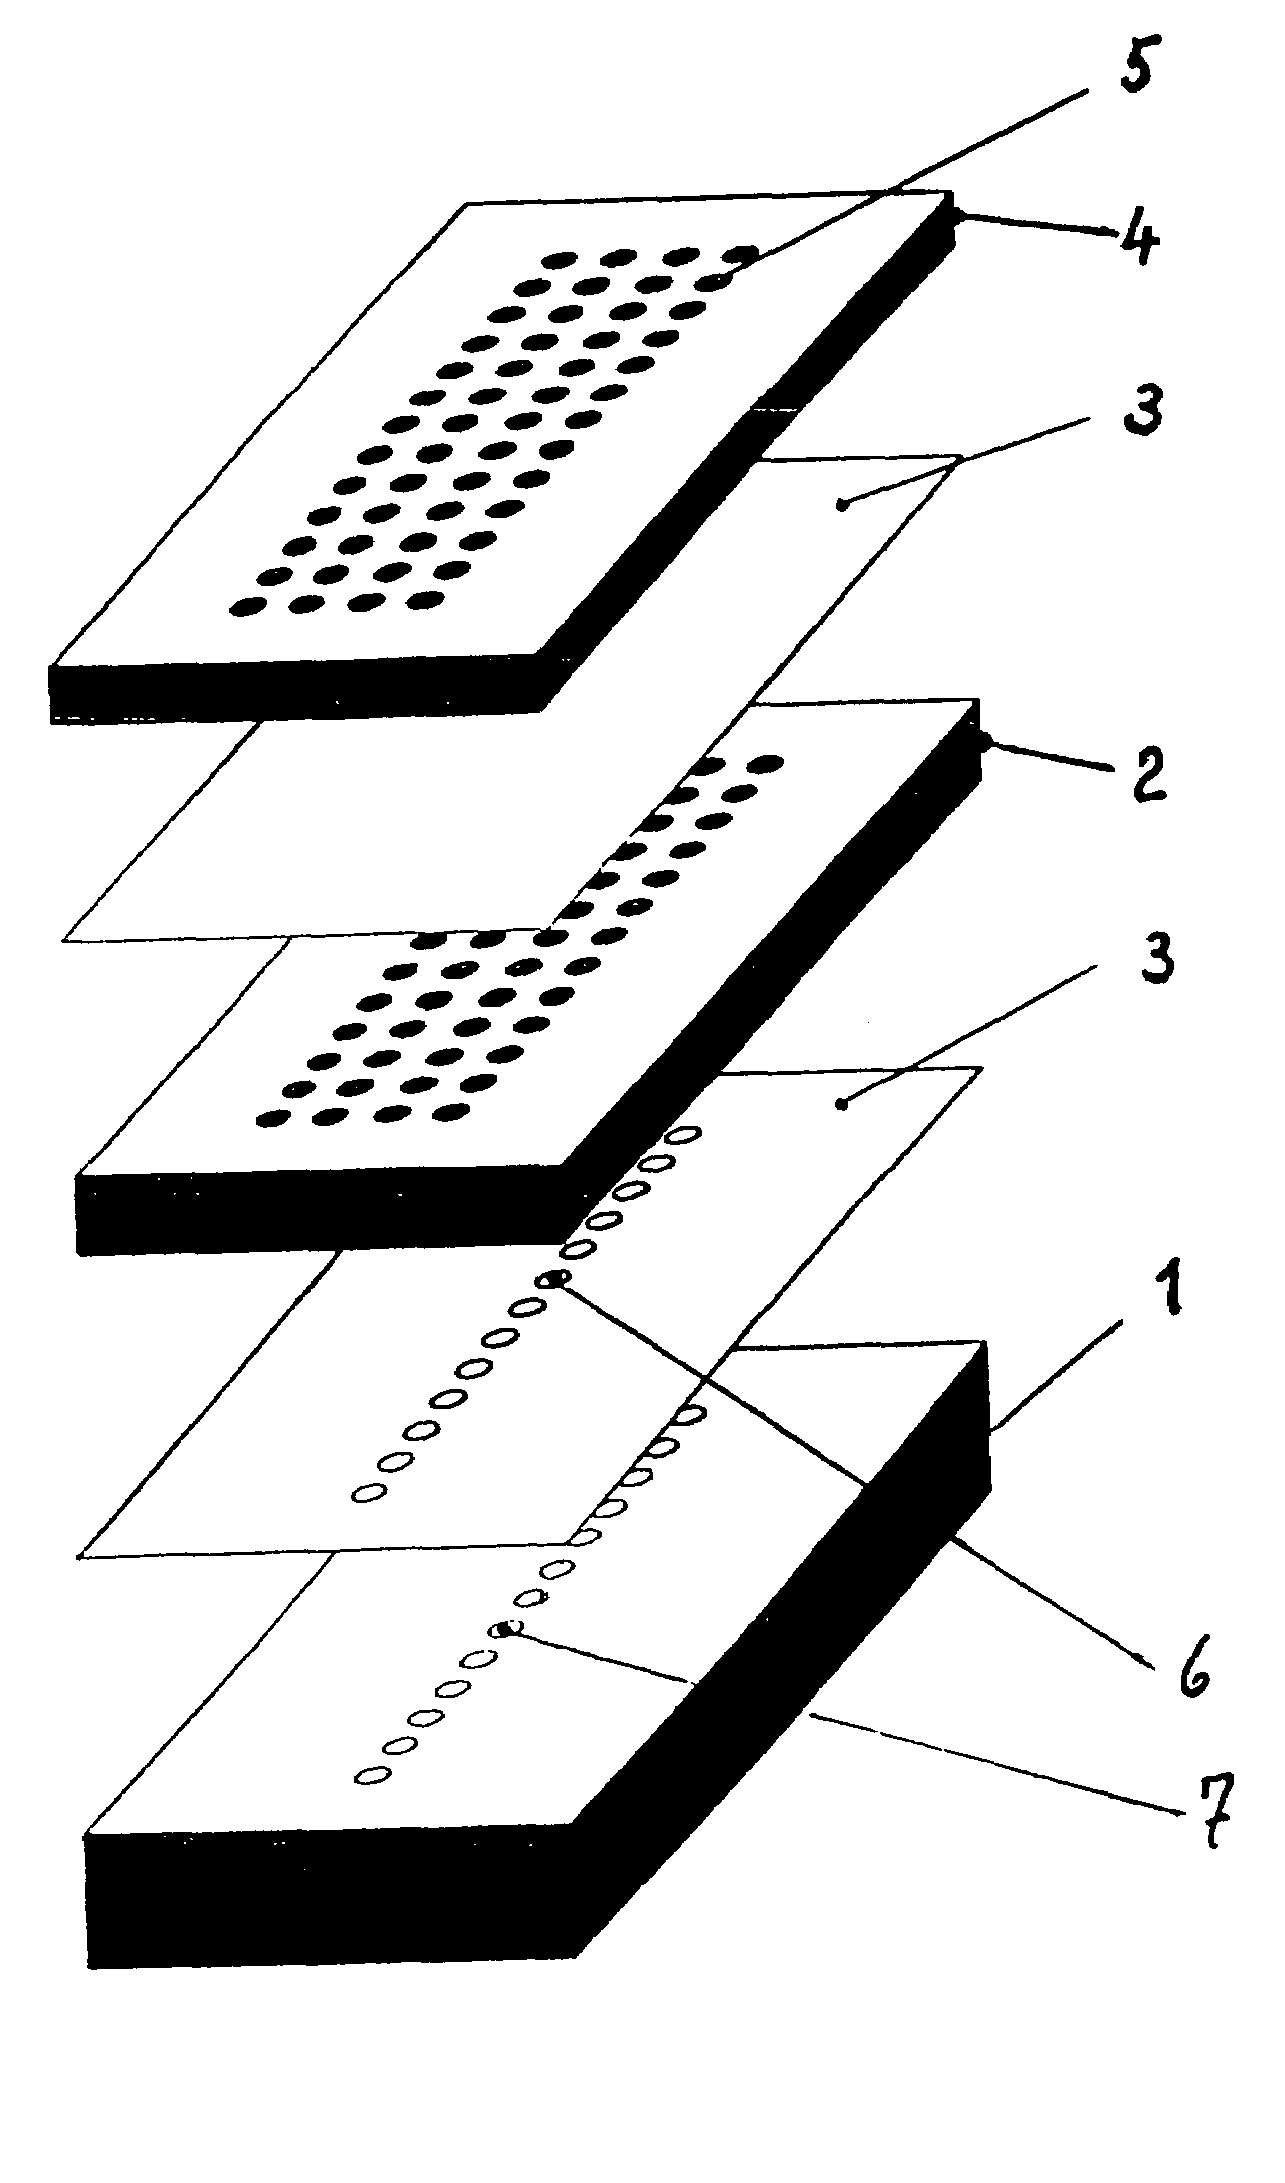 Outside structure conformal antenna in a supporting structure of a vehicle